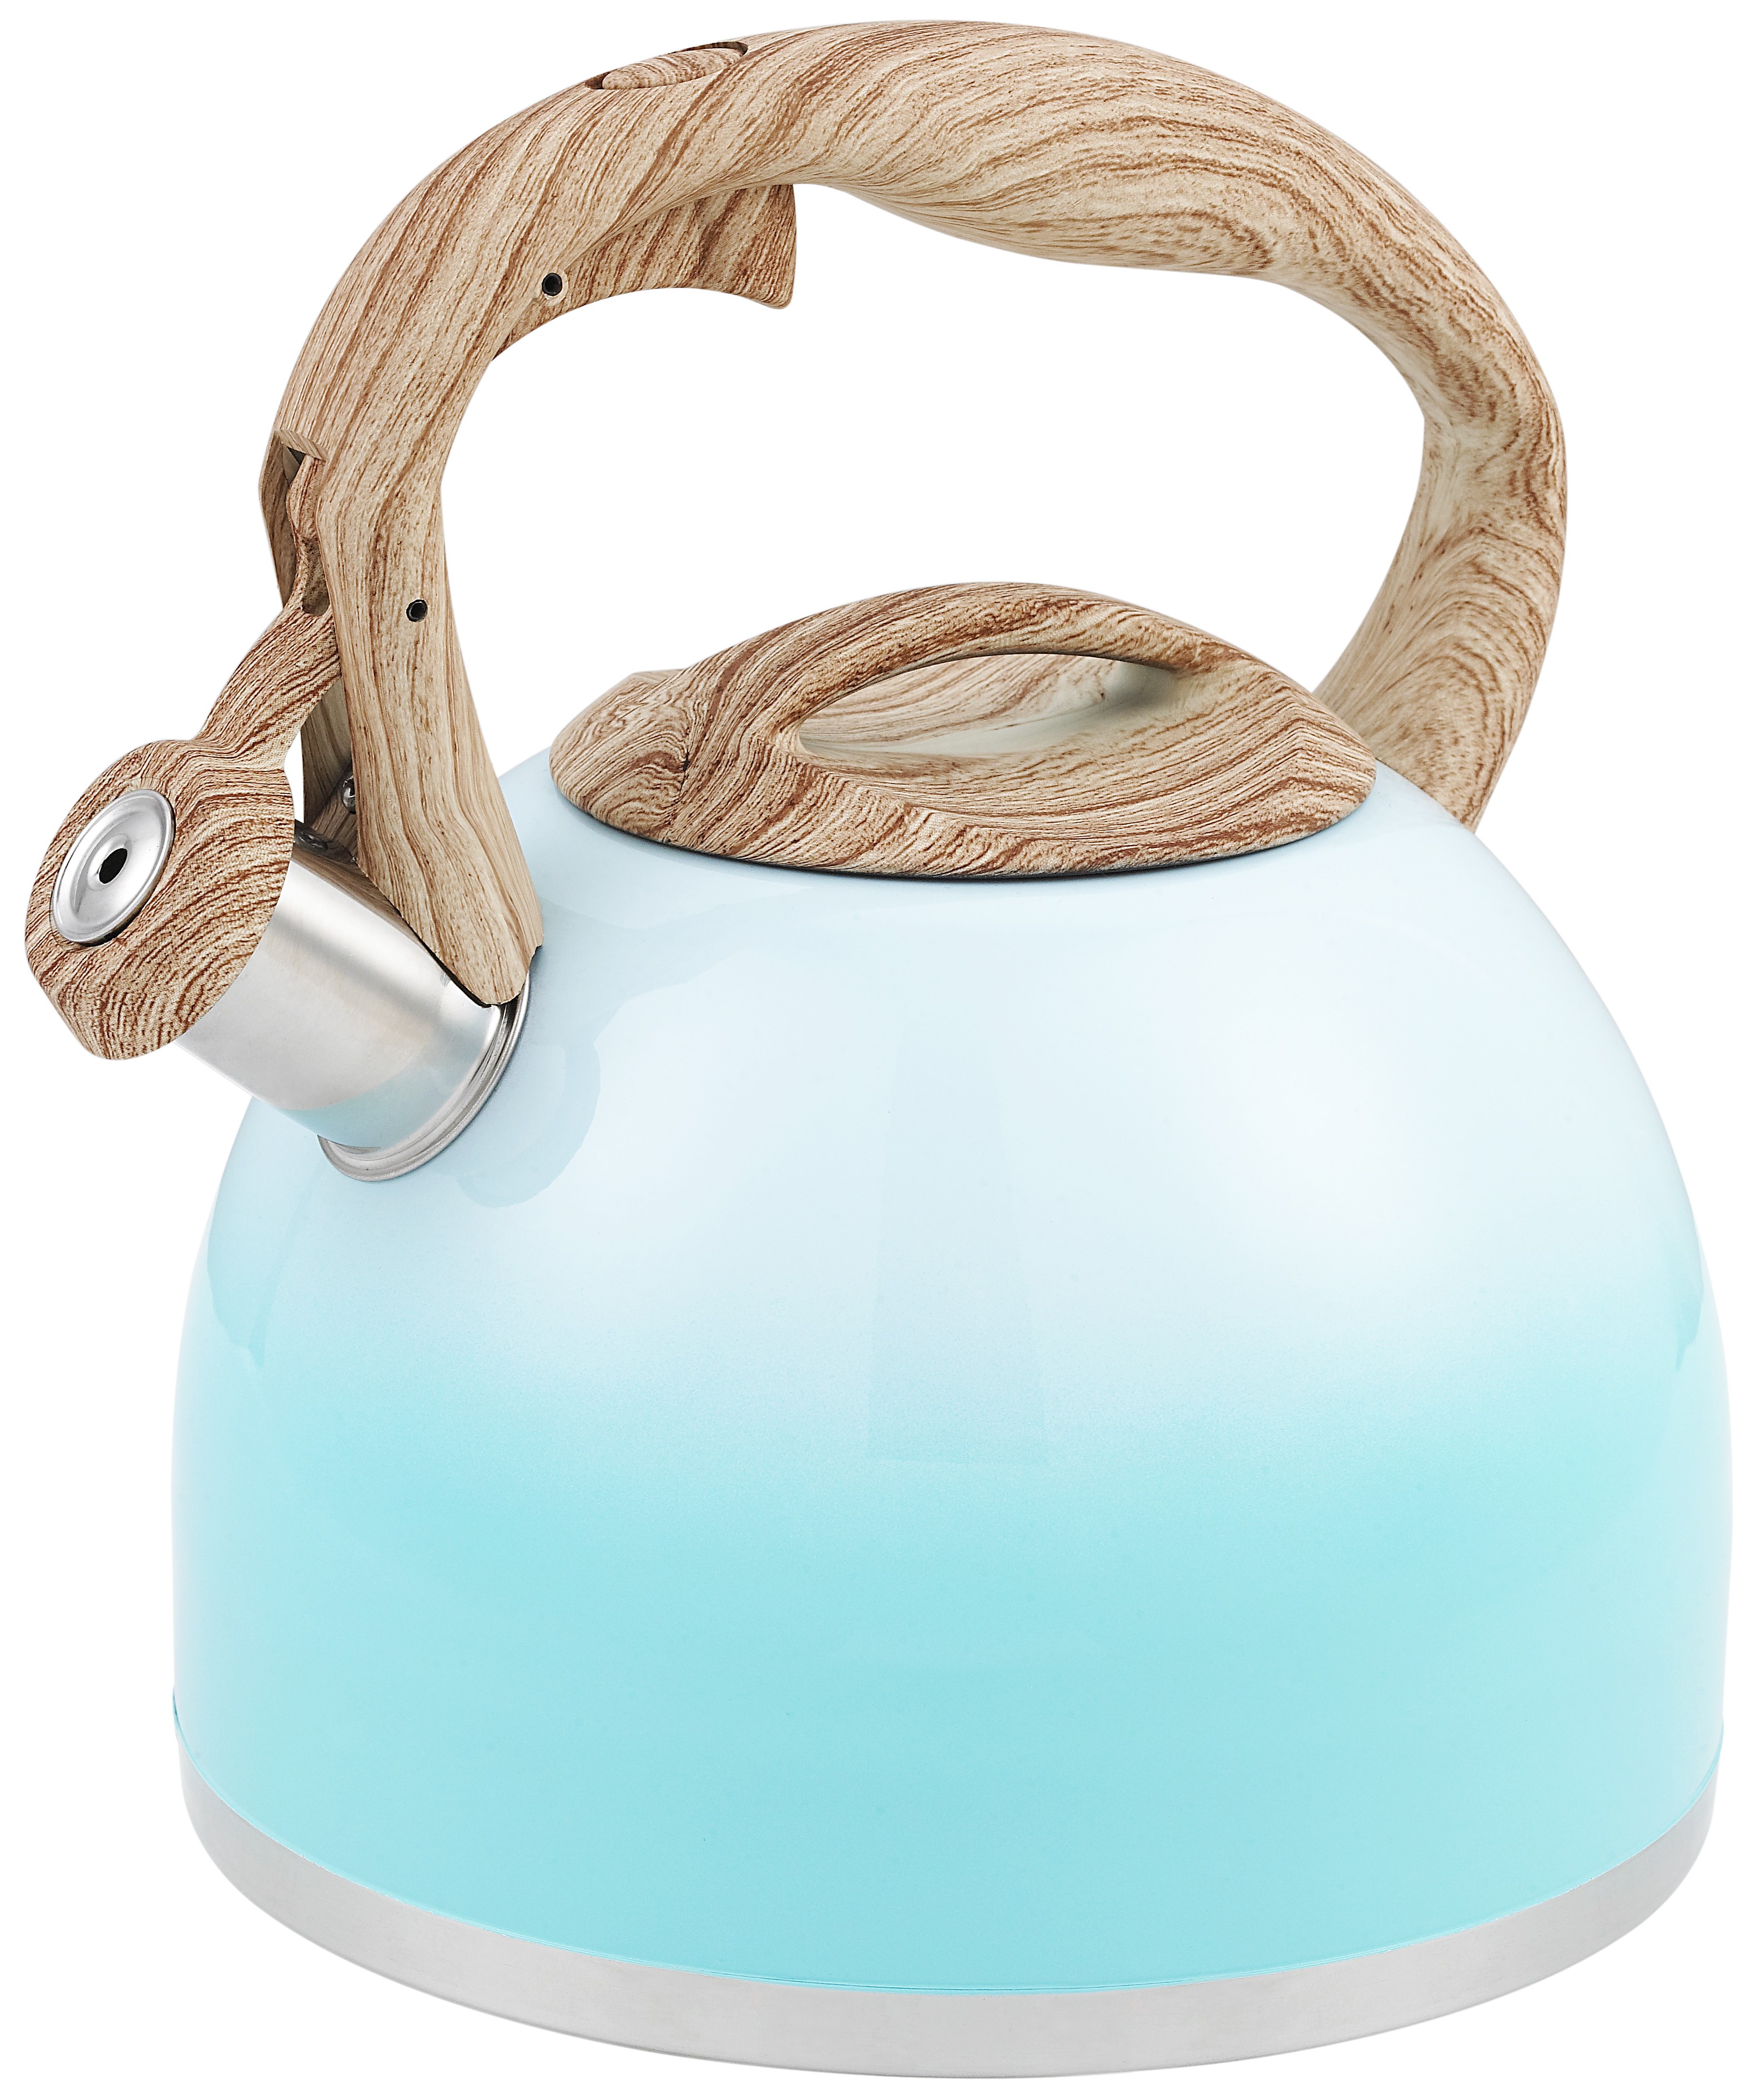 Whistling Tea Kettle Stainless Steel 2.8L Economic Kettle With Color Painting For Promotional Gift